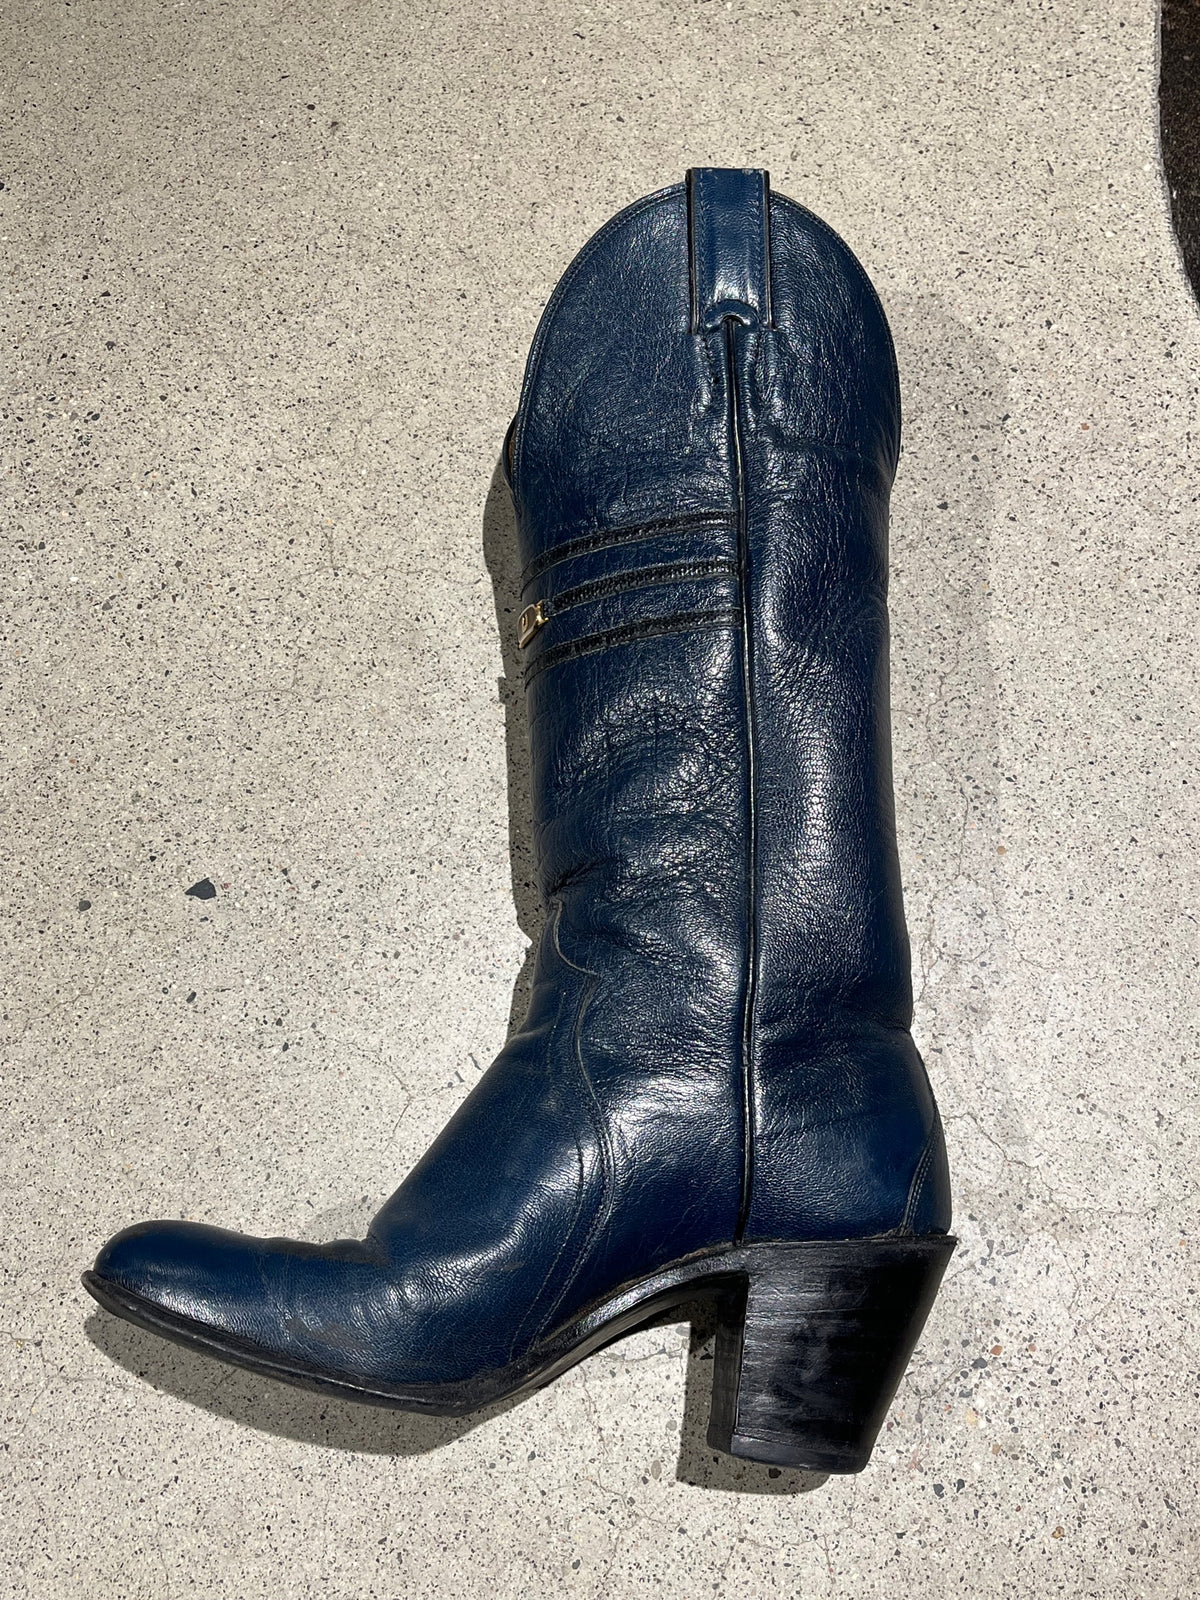 Vintage Navy Boot with Horseshoe